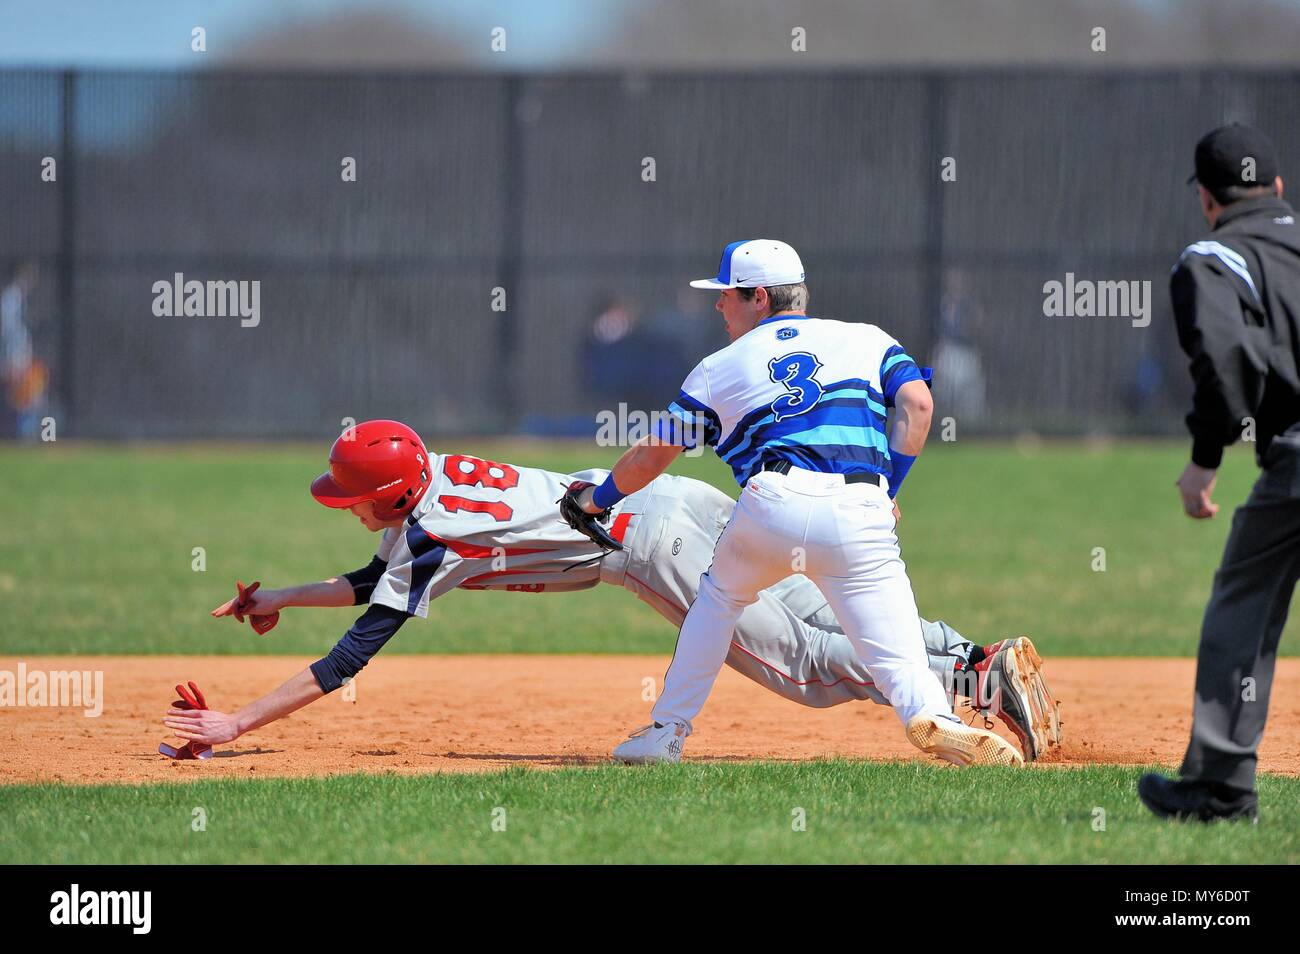 After being caught in a rundown between first and second a base runner is tagged out by an opposing infielder. USA. Stock Photo